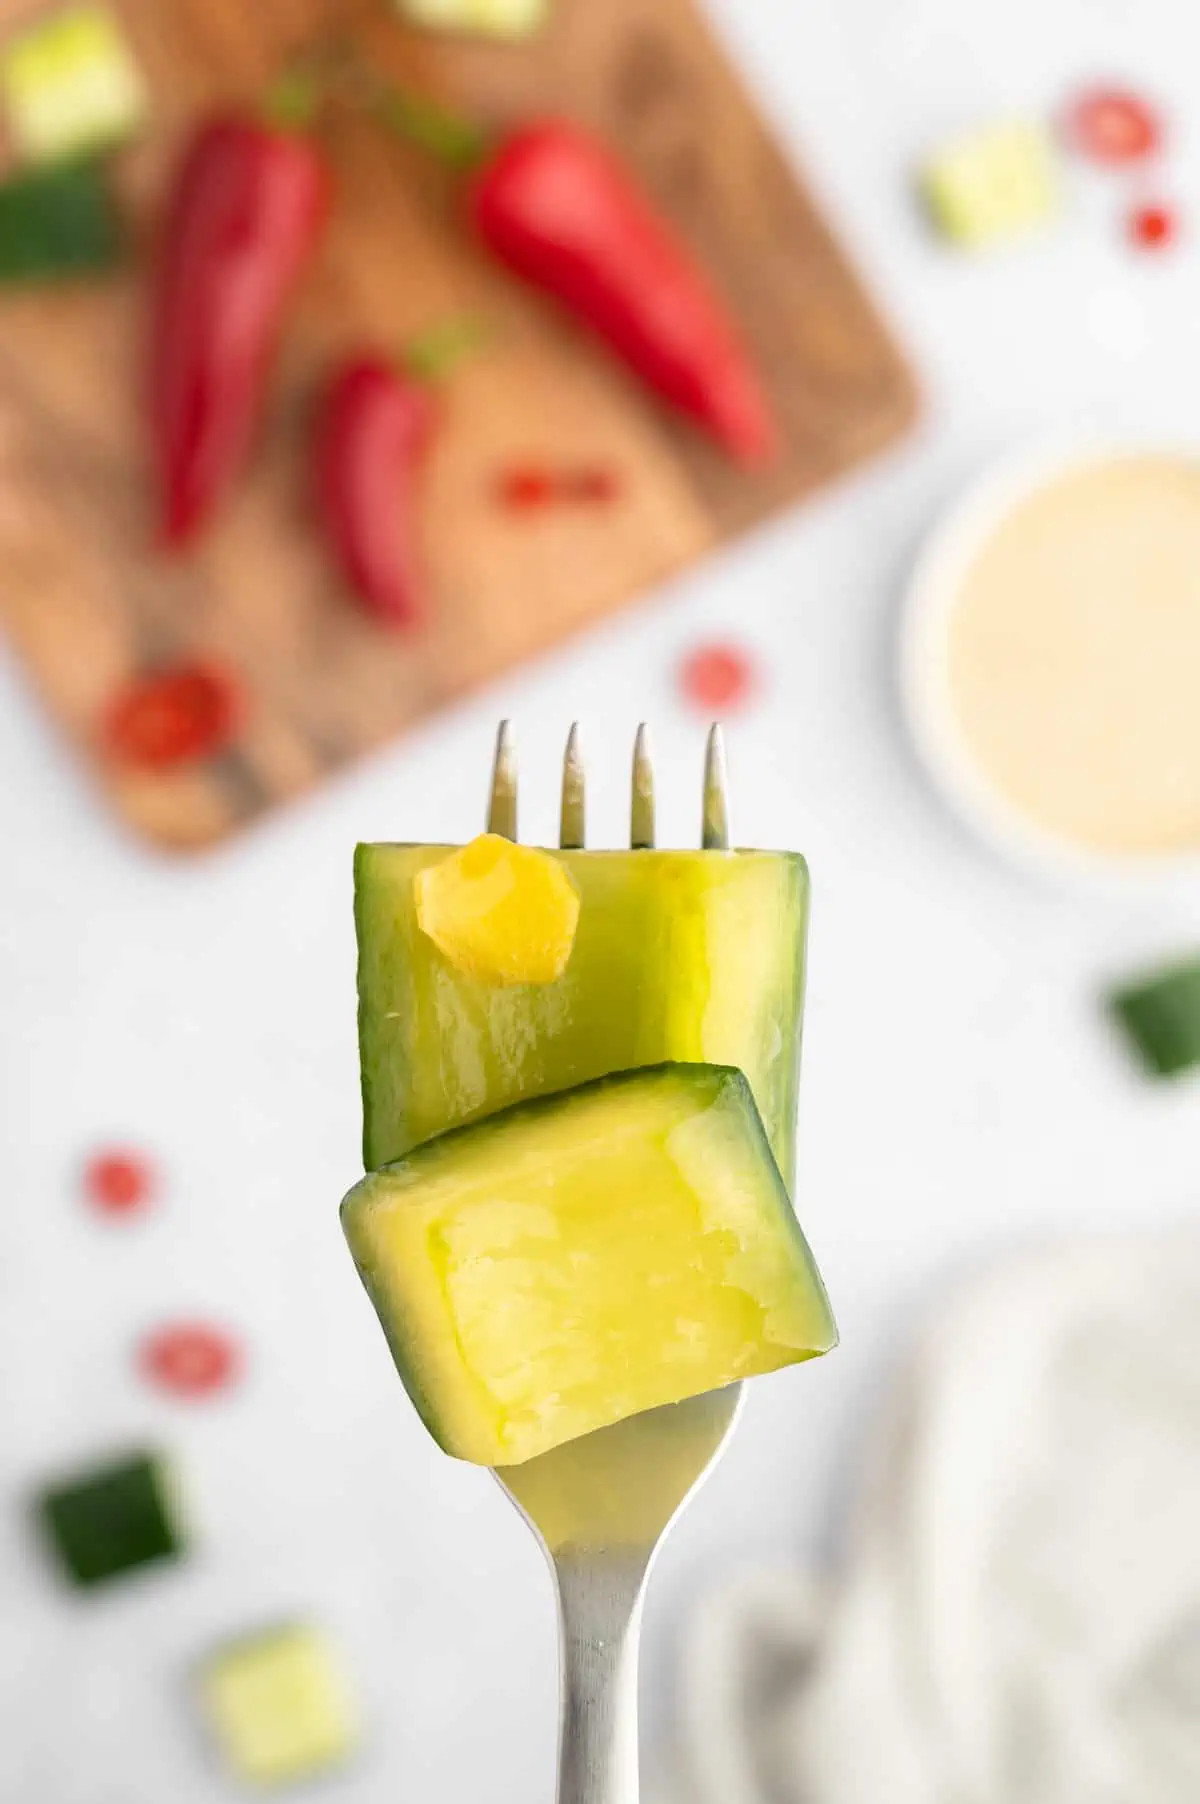 A couple pieces of Japanese pickled cucumber on a fork.